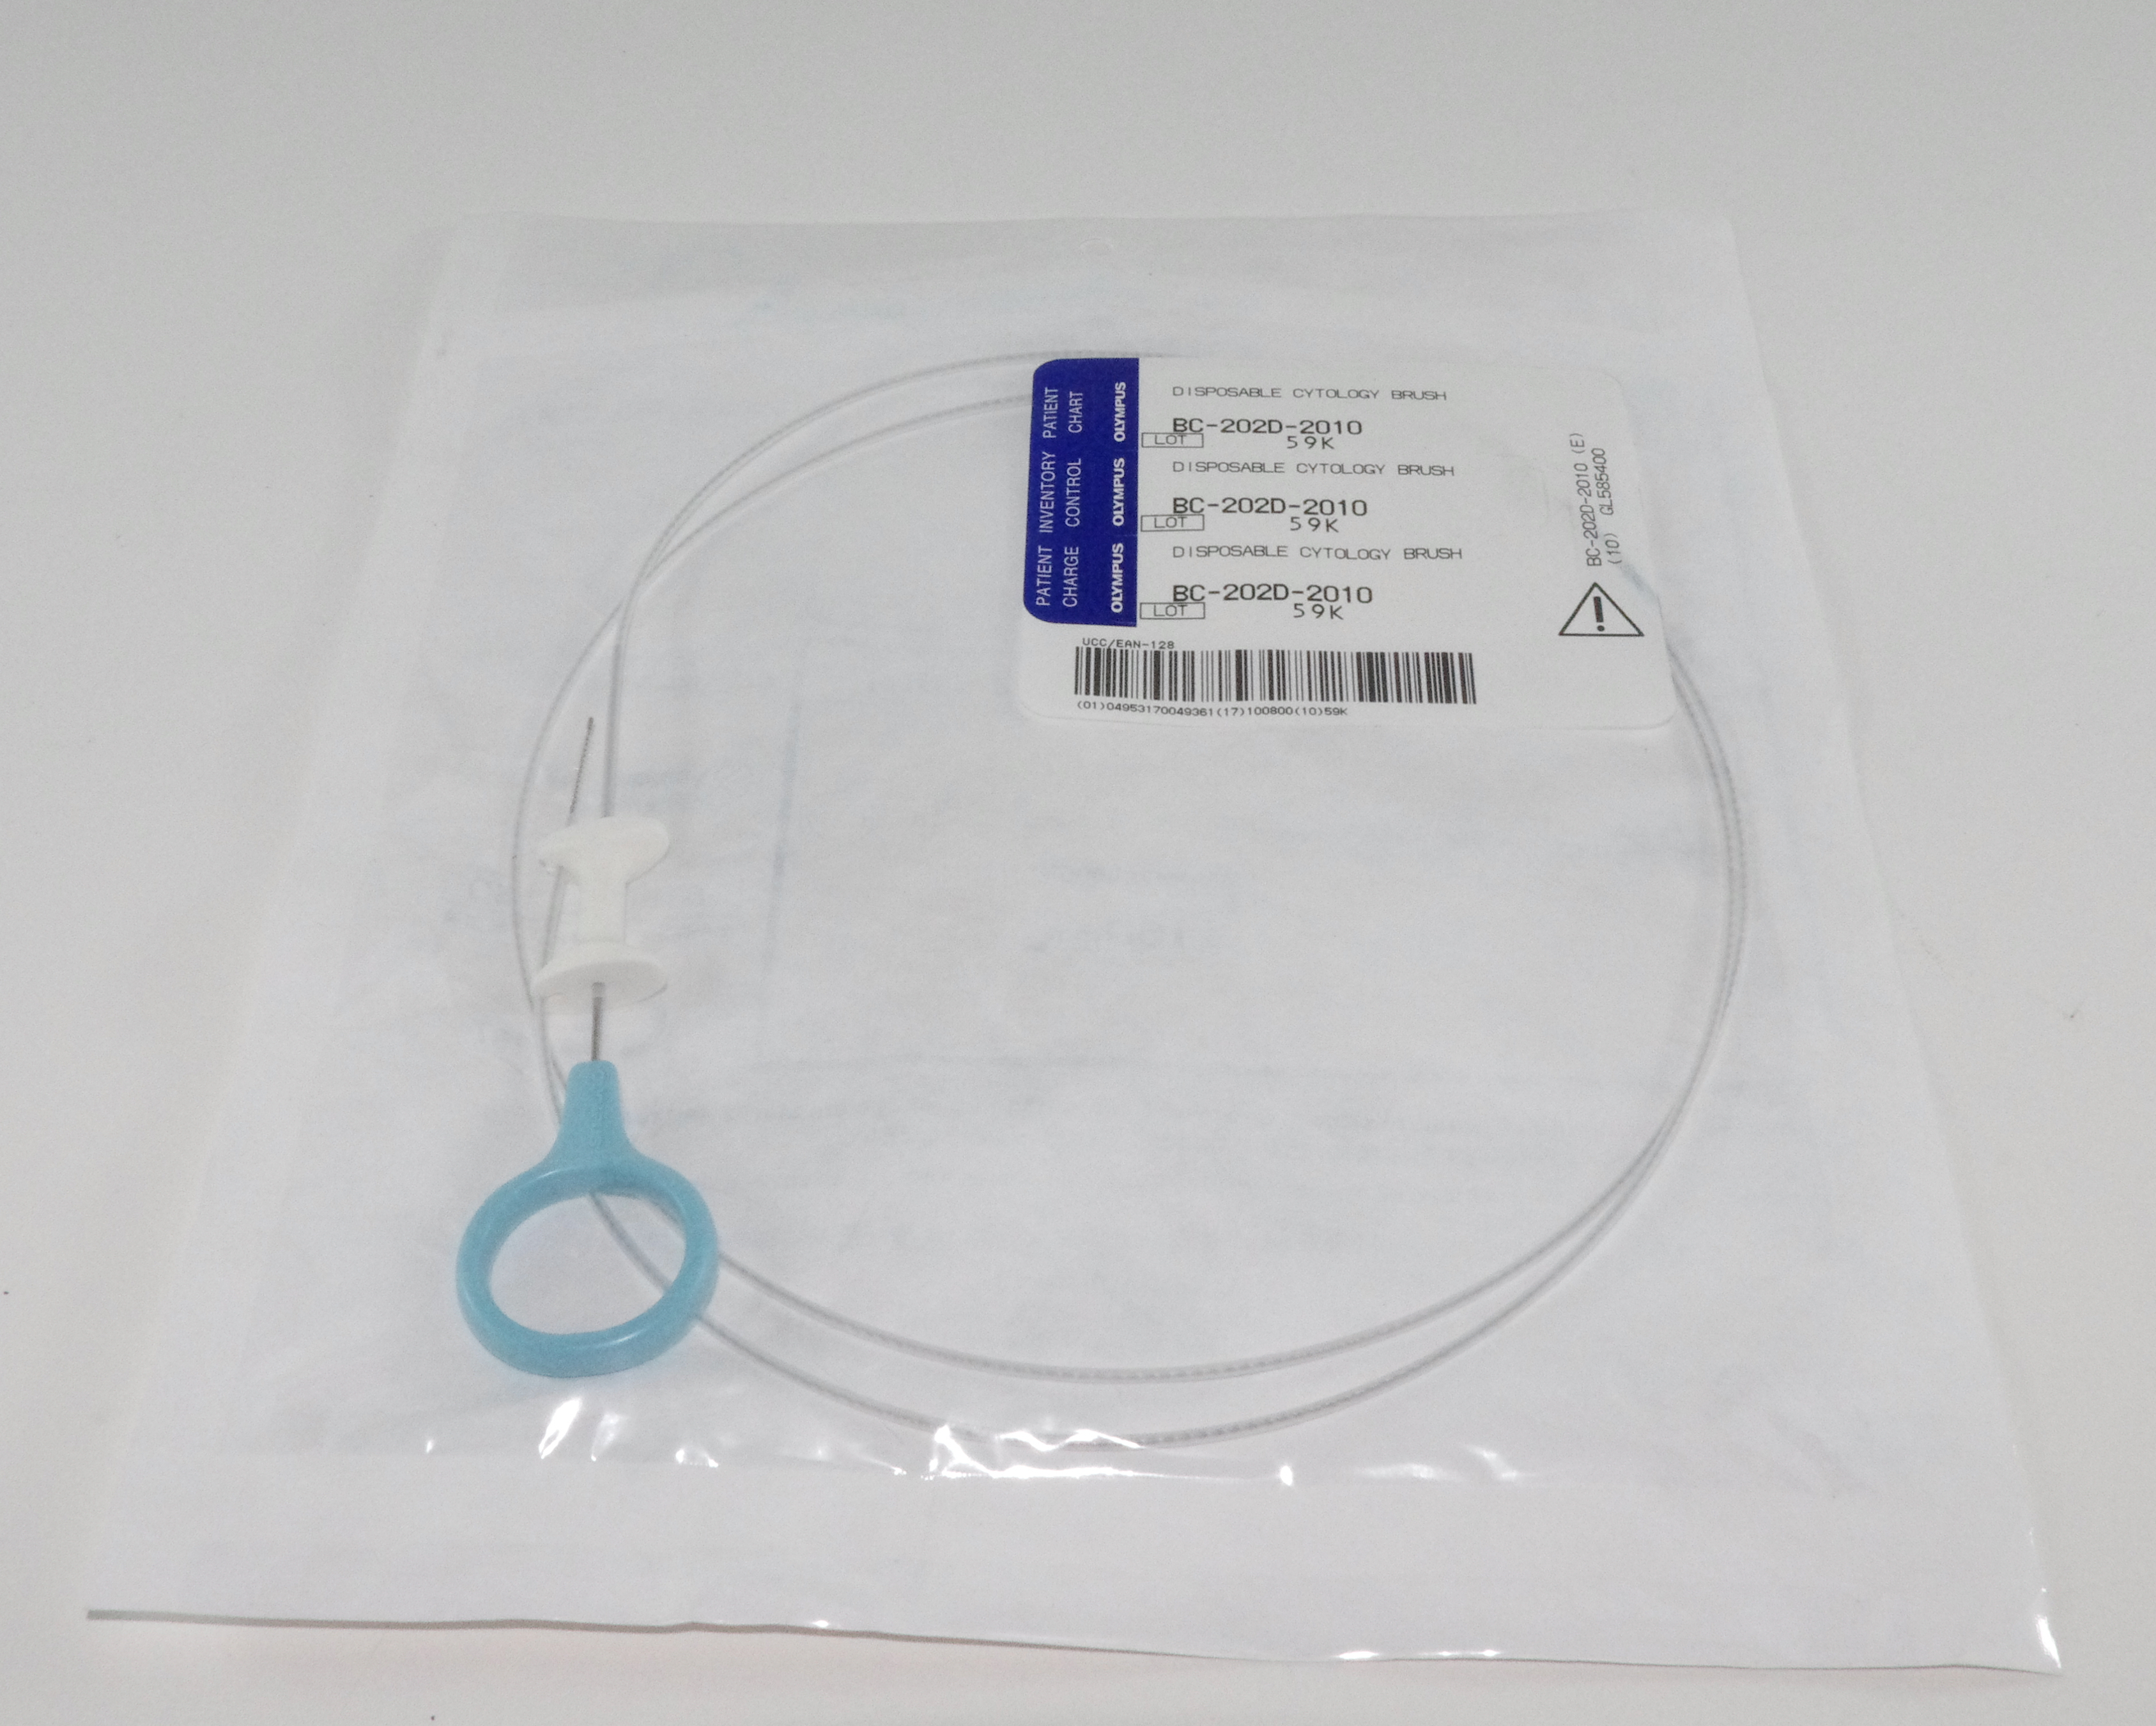 [Out-of-Date] Olympus Disposable Cytology Brush - BC-202D-2010